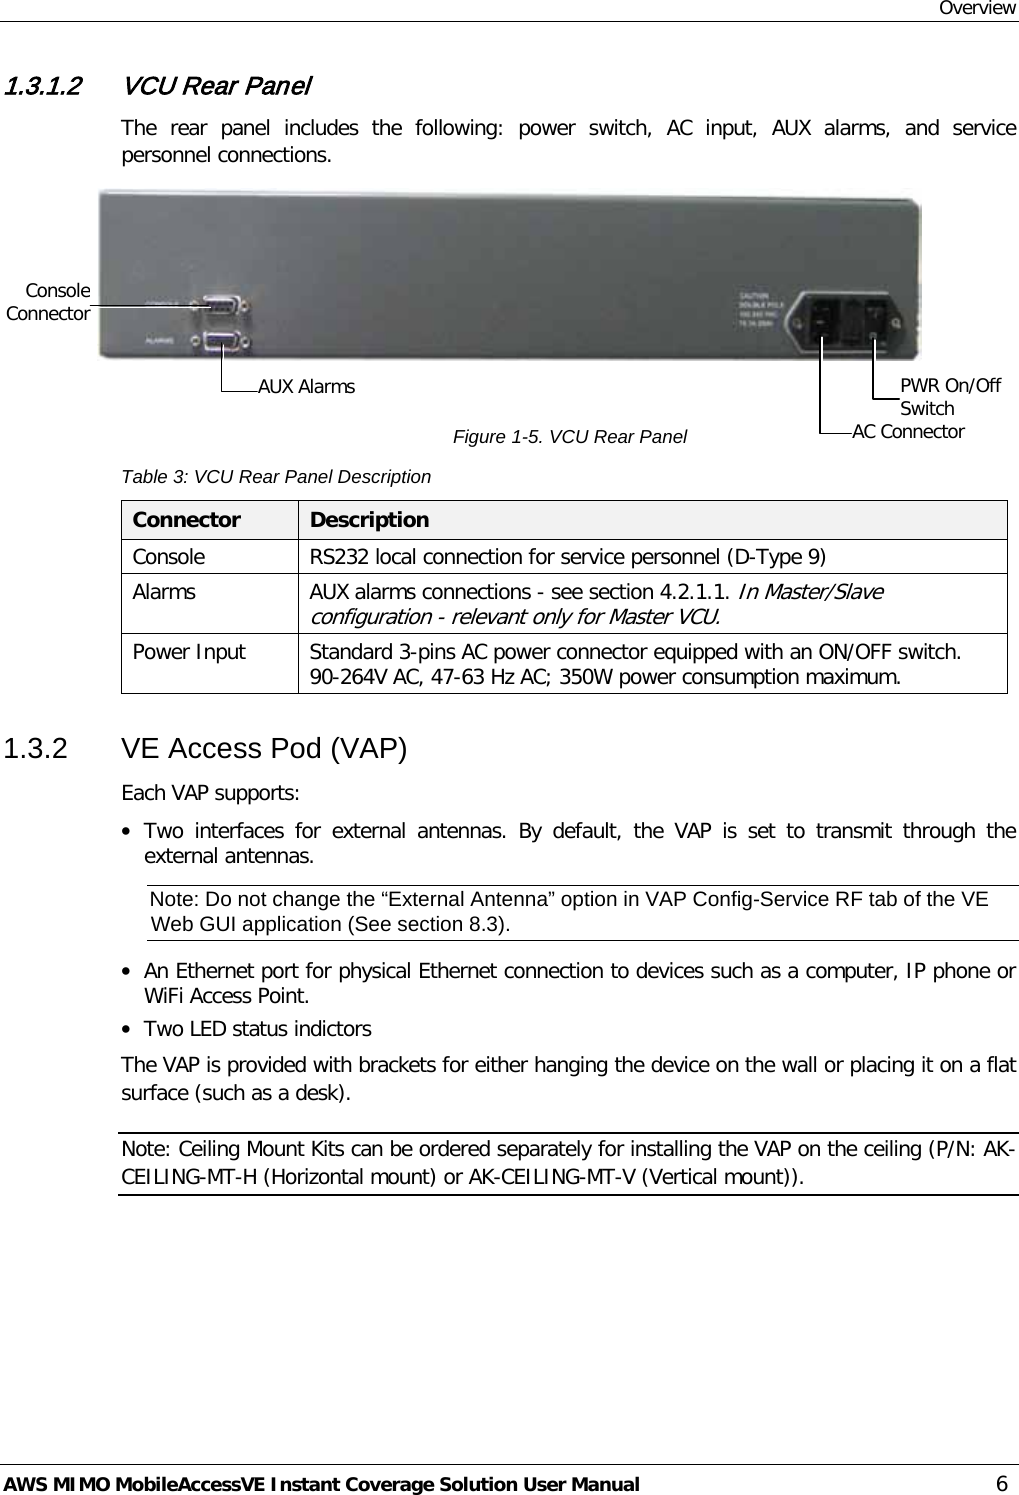 Overview AWS MIMO MobileAccessVE Instant Coverage Solution User Manual  6 1.3.1.2 VCU Rear Panel The rear panel includes the following:  power switch,  AC  input, AUX alarms,  and service personnel connections.   Figure  1-5. VCU Rear Panel Table 3: VCU Rear Panel Description Connector  Description Console RS232 local connection for service personnel (D-Type 9) Alarms AUX alarms connections - see section  4.2.1.1. In Master/Slave configuration - relevant only for Master VCU. Power Input Standard 3-pins AC power connector equipped with an ON/OFF switch. 90-264V AC, 47-63 Hz AC; 350W power consumption maximum. 1.3.2  VE Access Pod (VAP) Each VAP supports: • Two  interfaces for external antennas. By default, the VAP is set to transmit through the external antennas.  Note: Do not change the “External Antenna” option in VAP Config-Service RF tab of the VE Web GUI application (See section  8.3). • An Ethernet port for physical Ethernet connection to devices such as a computer, IP phone or WiFi Access Point. • Two LED status indictors The VAP is provided with brackets for either hanging the device on the wall or placing it on a flat surface (such as a desk).  Note: Ceiling Mount Kits can be ordered separately for installing the VAP on the ceiling (P/N: AK-CEILING-MT-H (Horizontal mount) or AK-CEILING-MT-V (Vertical mount)). PWR On/Off Switch AC Connector AUX Alarms Console Connector 